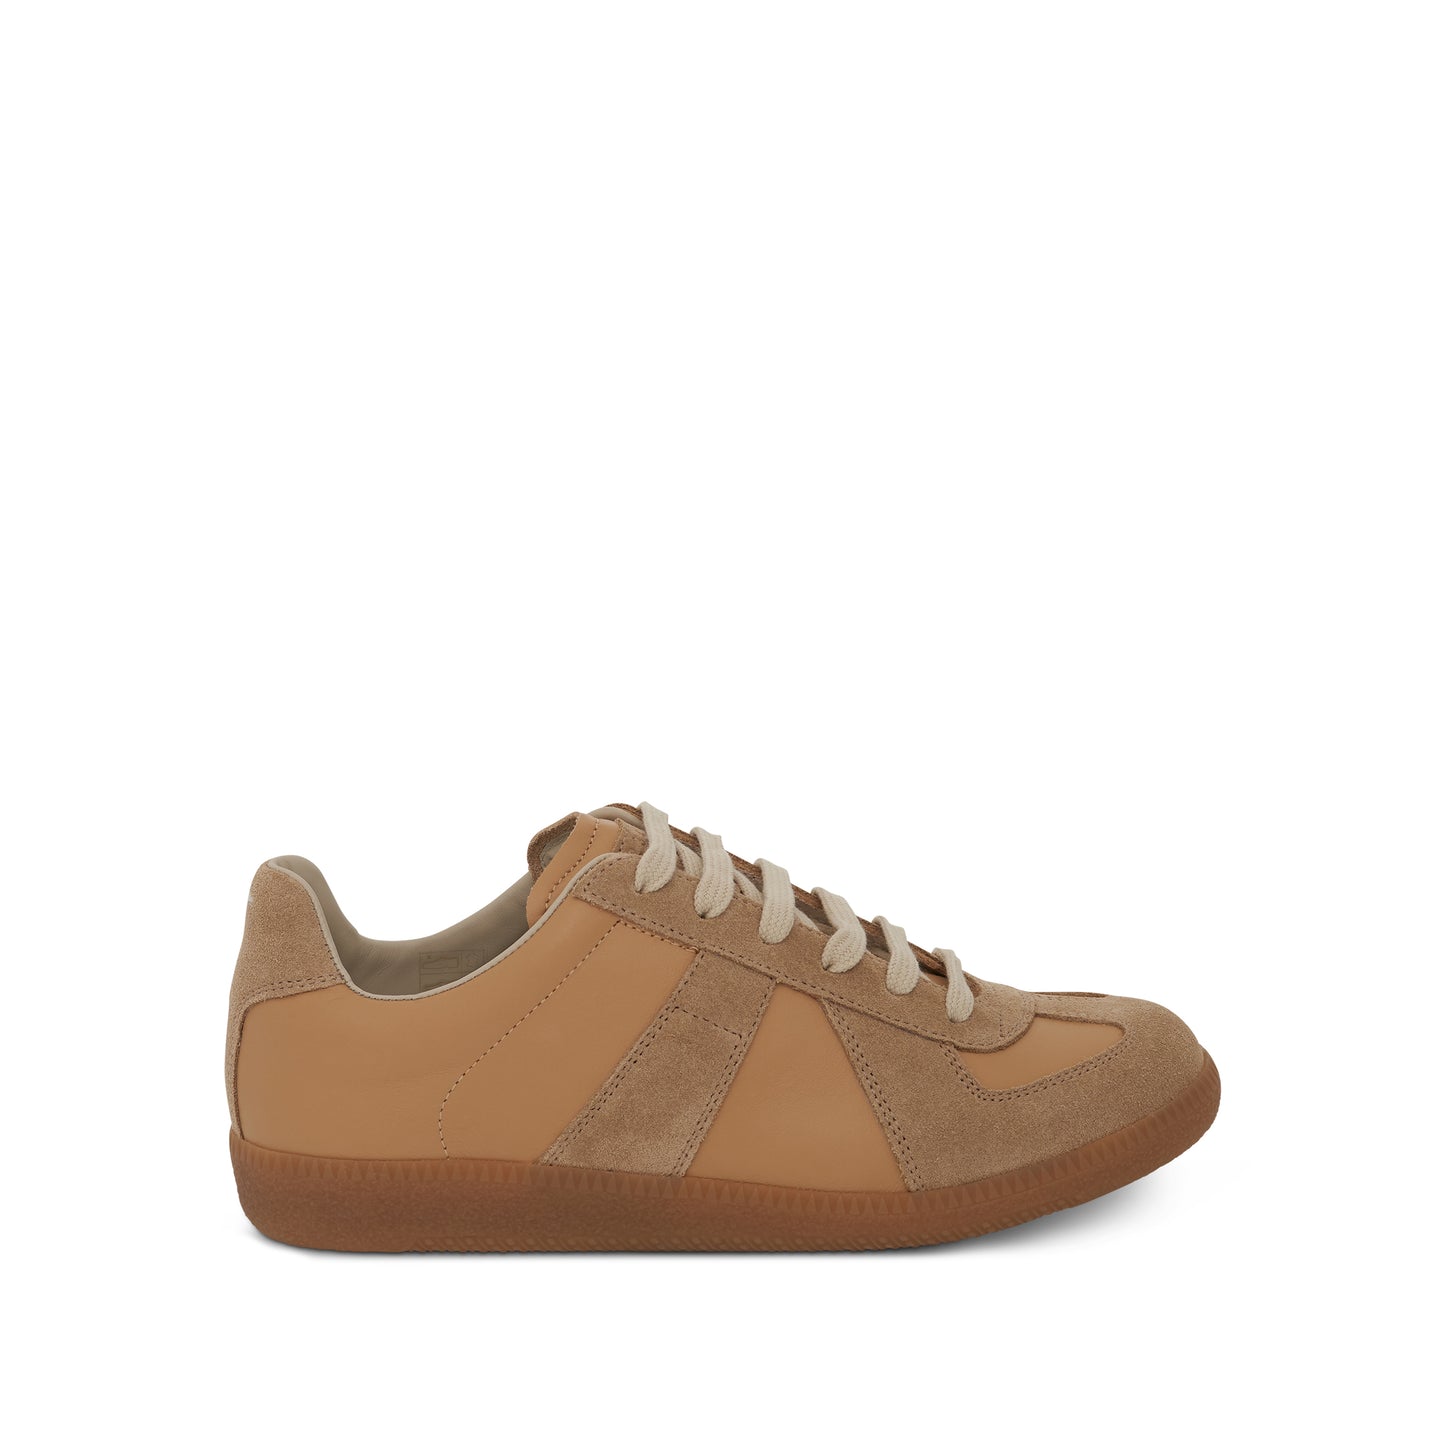 Replica Sneakers in Sand/Croissant